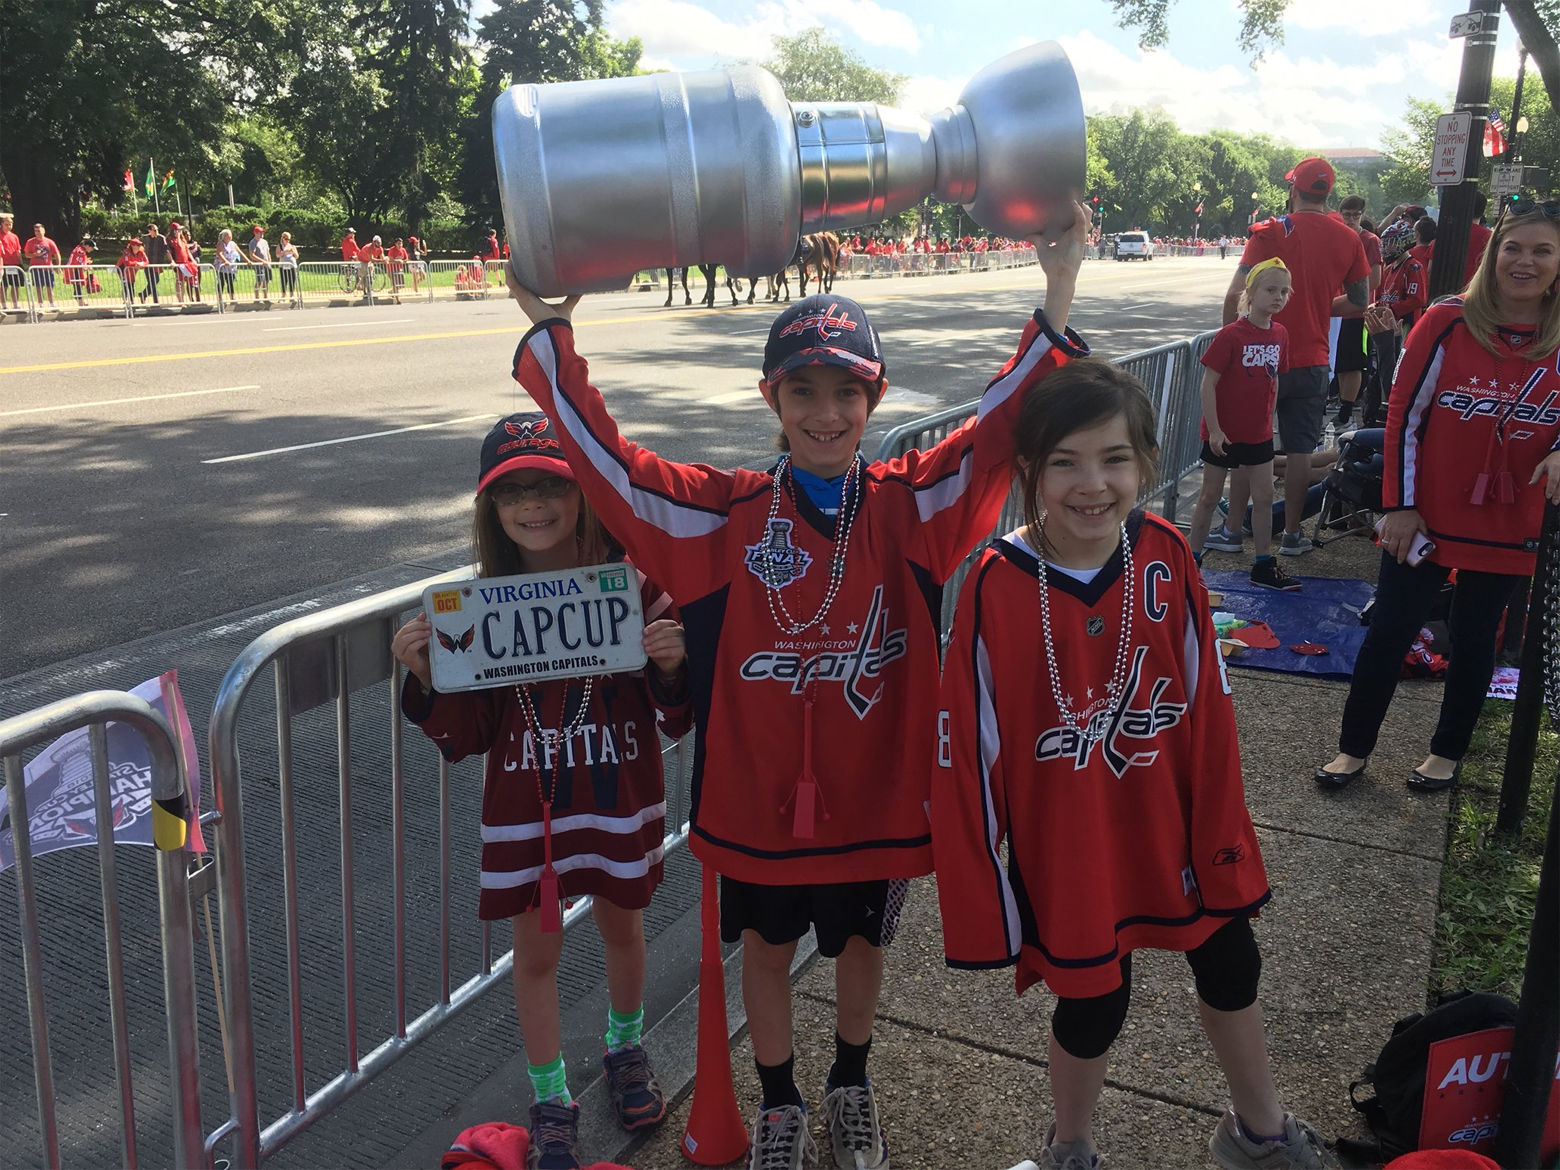 Nicholas shows off his home-made Stanley Cup. (WTOP/Mike Murillo)